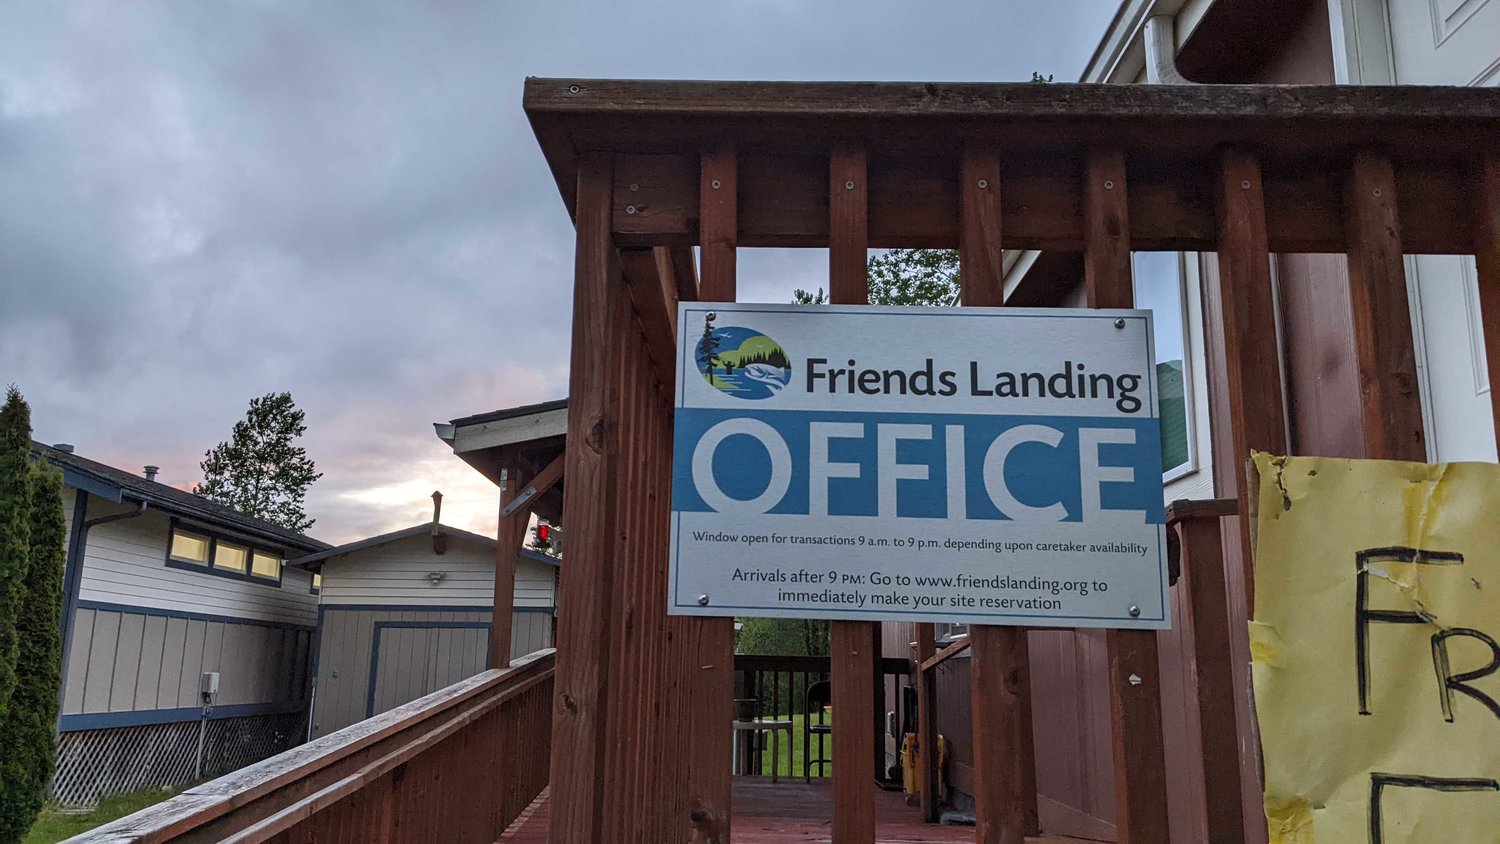 The Friends Landing Office is seen in Montesano at sunset.